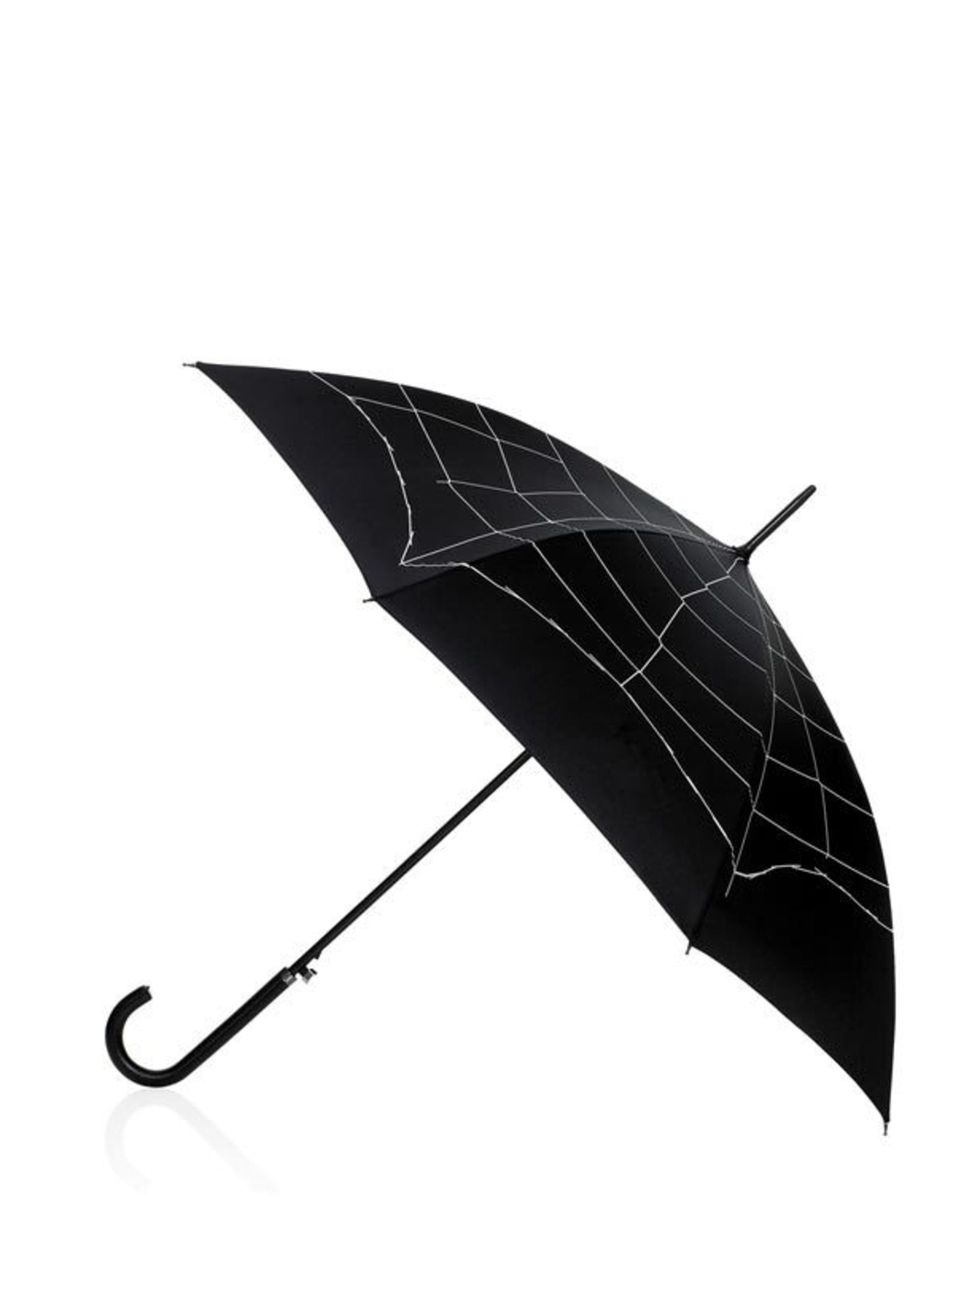 <p><a href="http://www.luluguinness.com/ProductPage.aspx?productId=UMBR-723-275-010">Lulu Guinness</a> spiders web umbrella, £40</p>